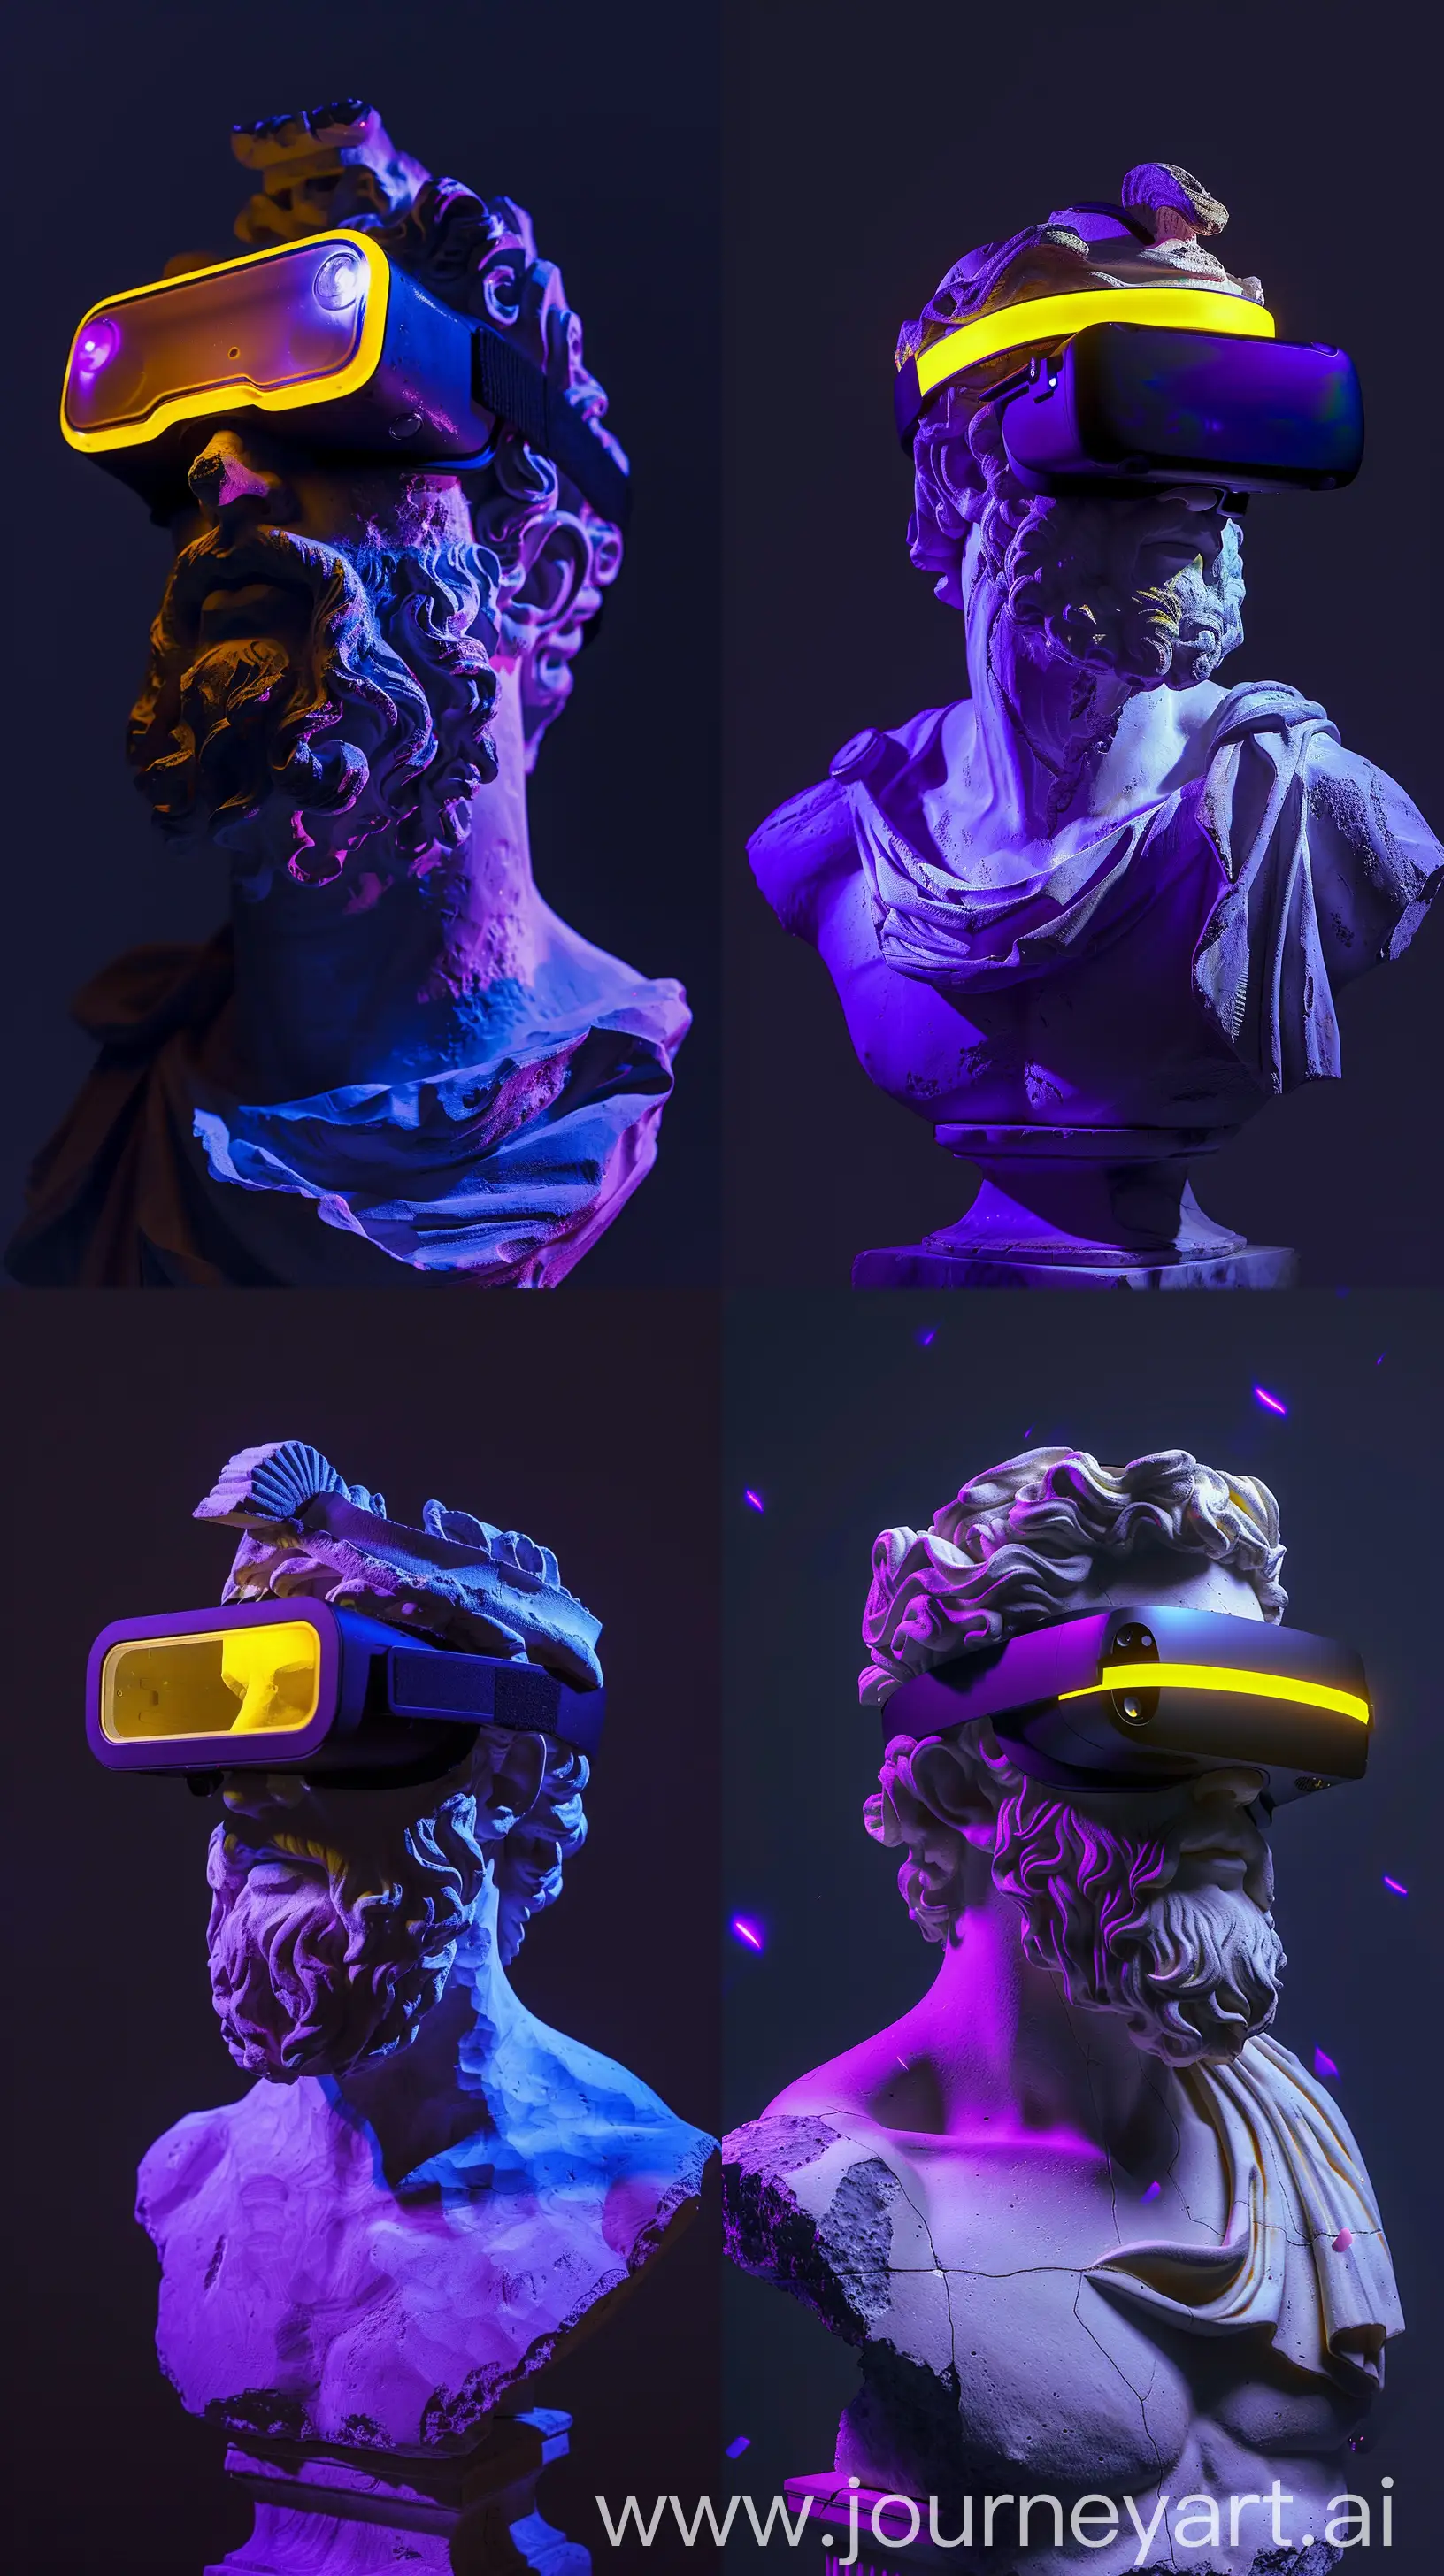 A Plaster Sculpture of Zeus, Black VR Glasses With Yellow LED, Purple Light Reflections on Sculpture, Dark Background, Dreamy Pose, Medium Shot, Space Above the Image is Empty, High Precision --v 6.0 --ar 9:16